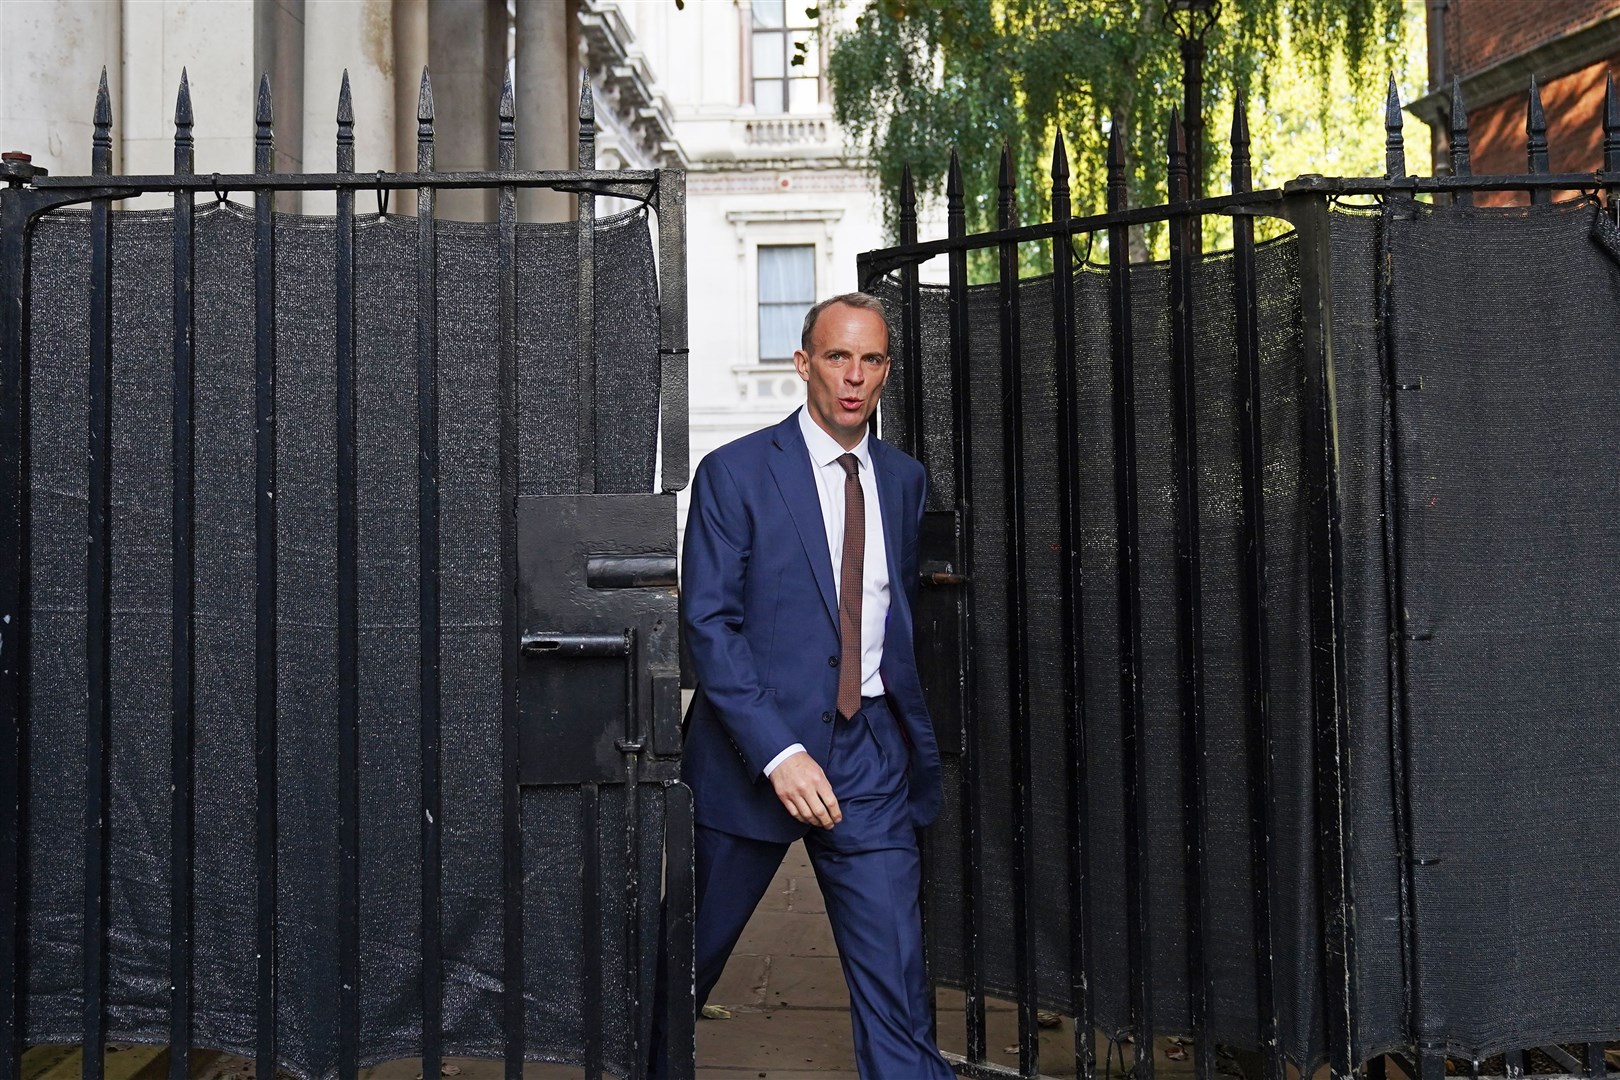 Dominic Raab came under fire for being on holiday amid a crisis on his watch, with criminal barristers voting for an all-out strike as he was on leave (Stefan Rousseau/PA)